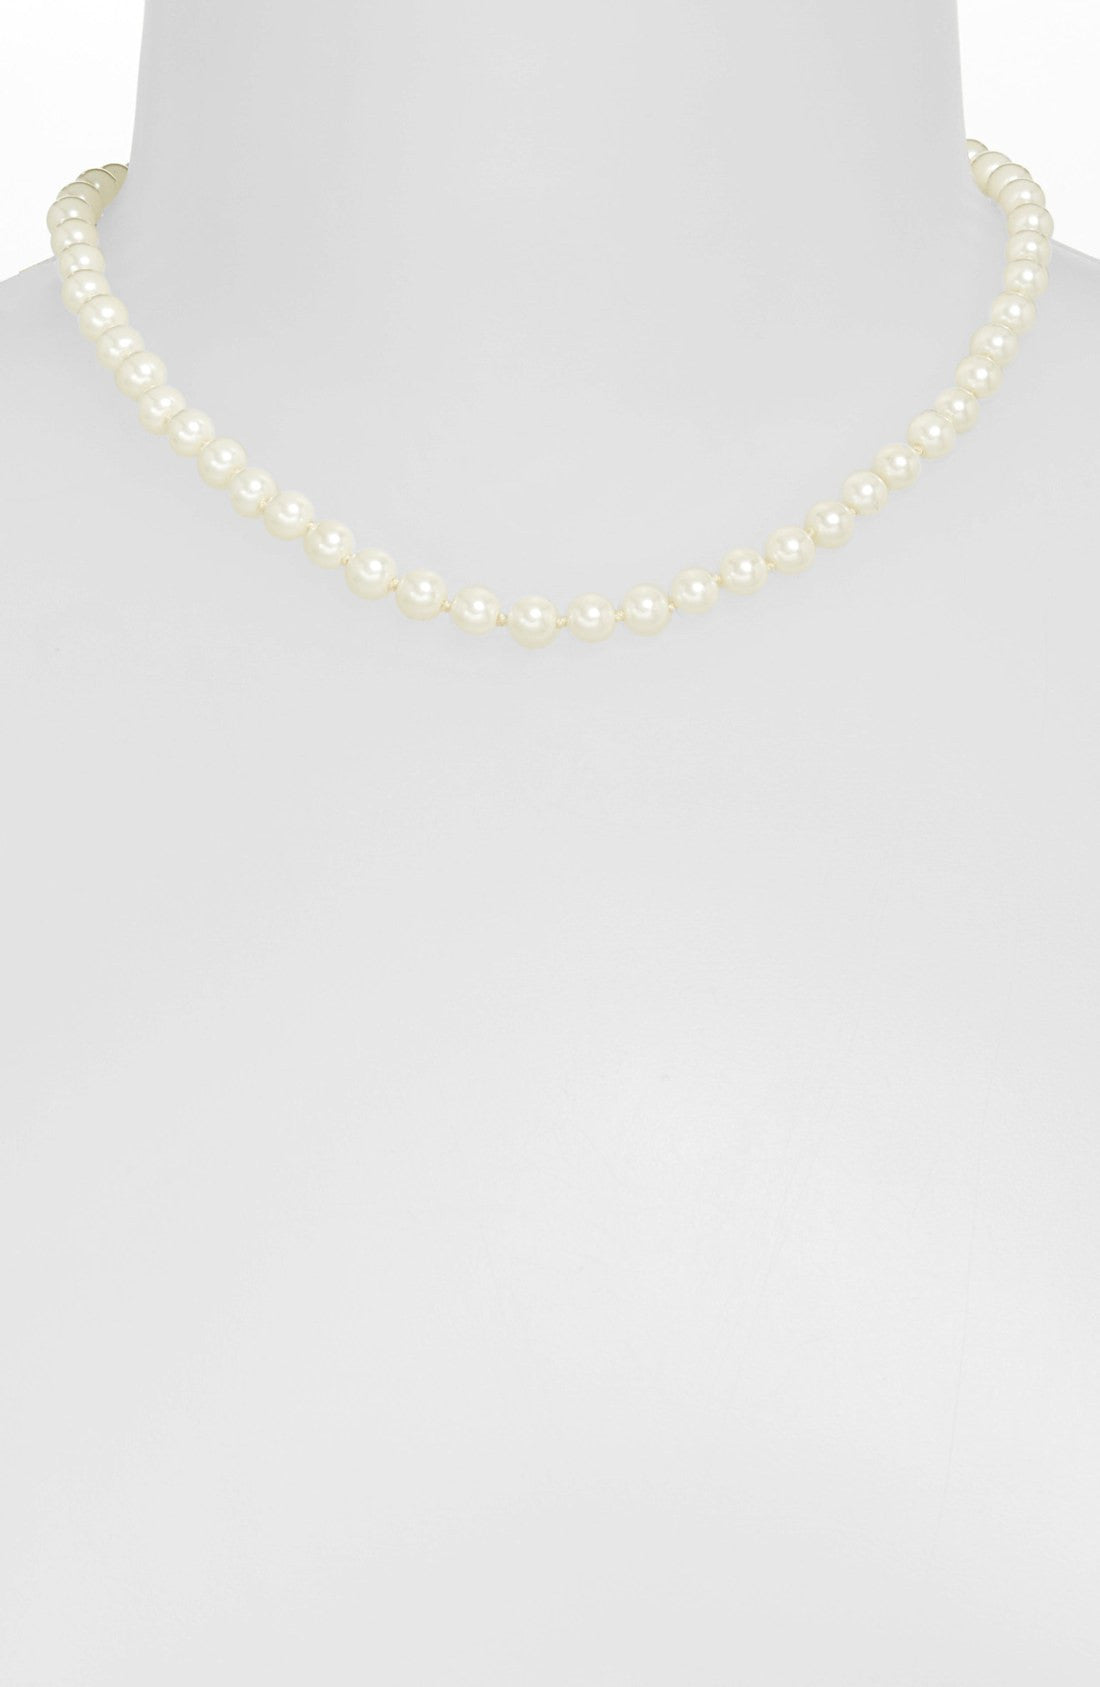 Lauren by Ralph Lauren Glass Pearl and Sterling Necklace Neck View